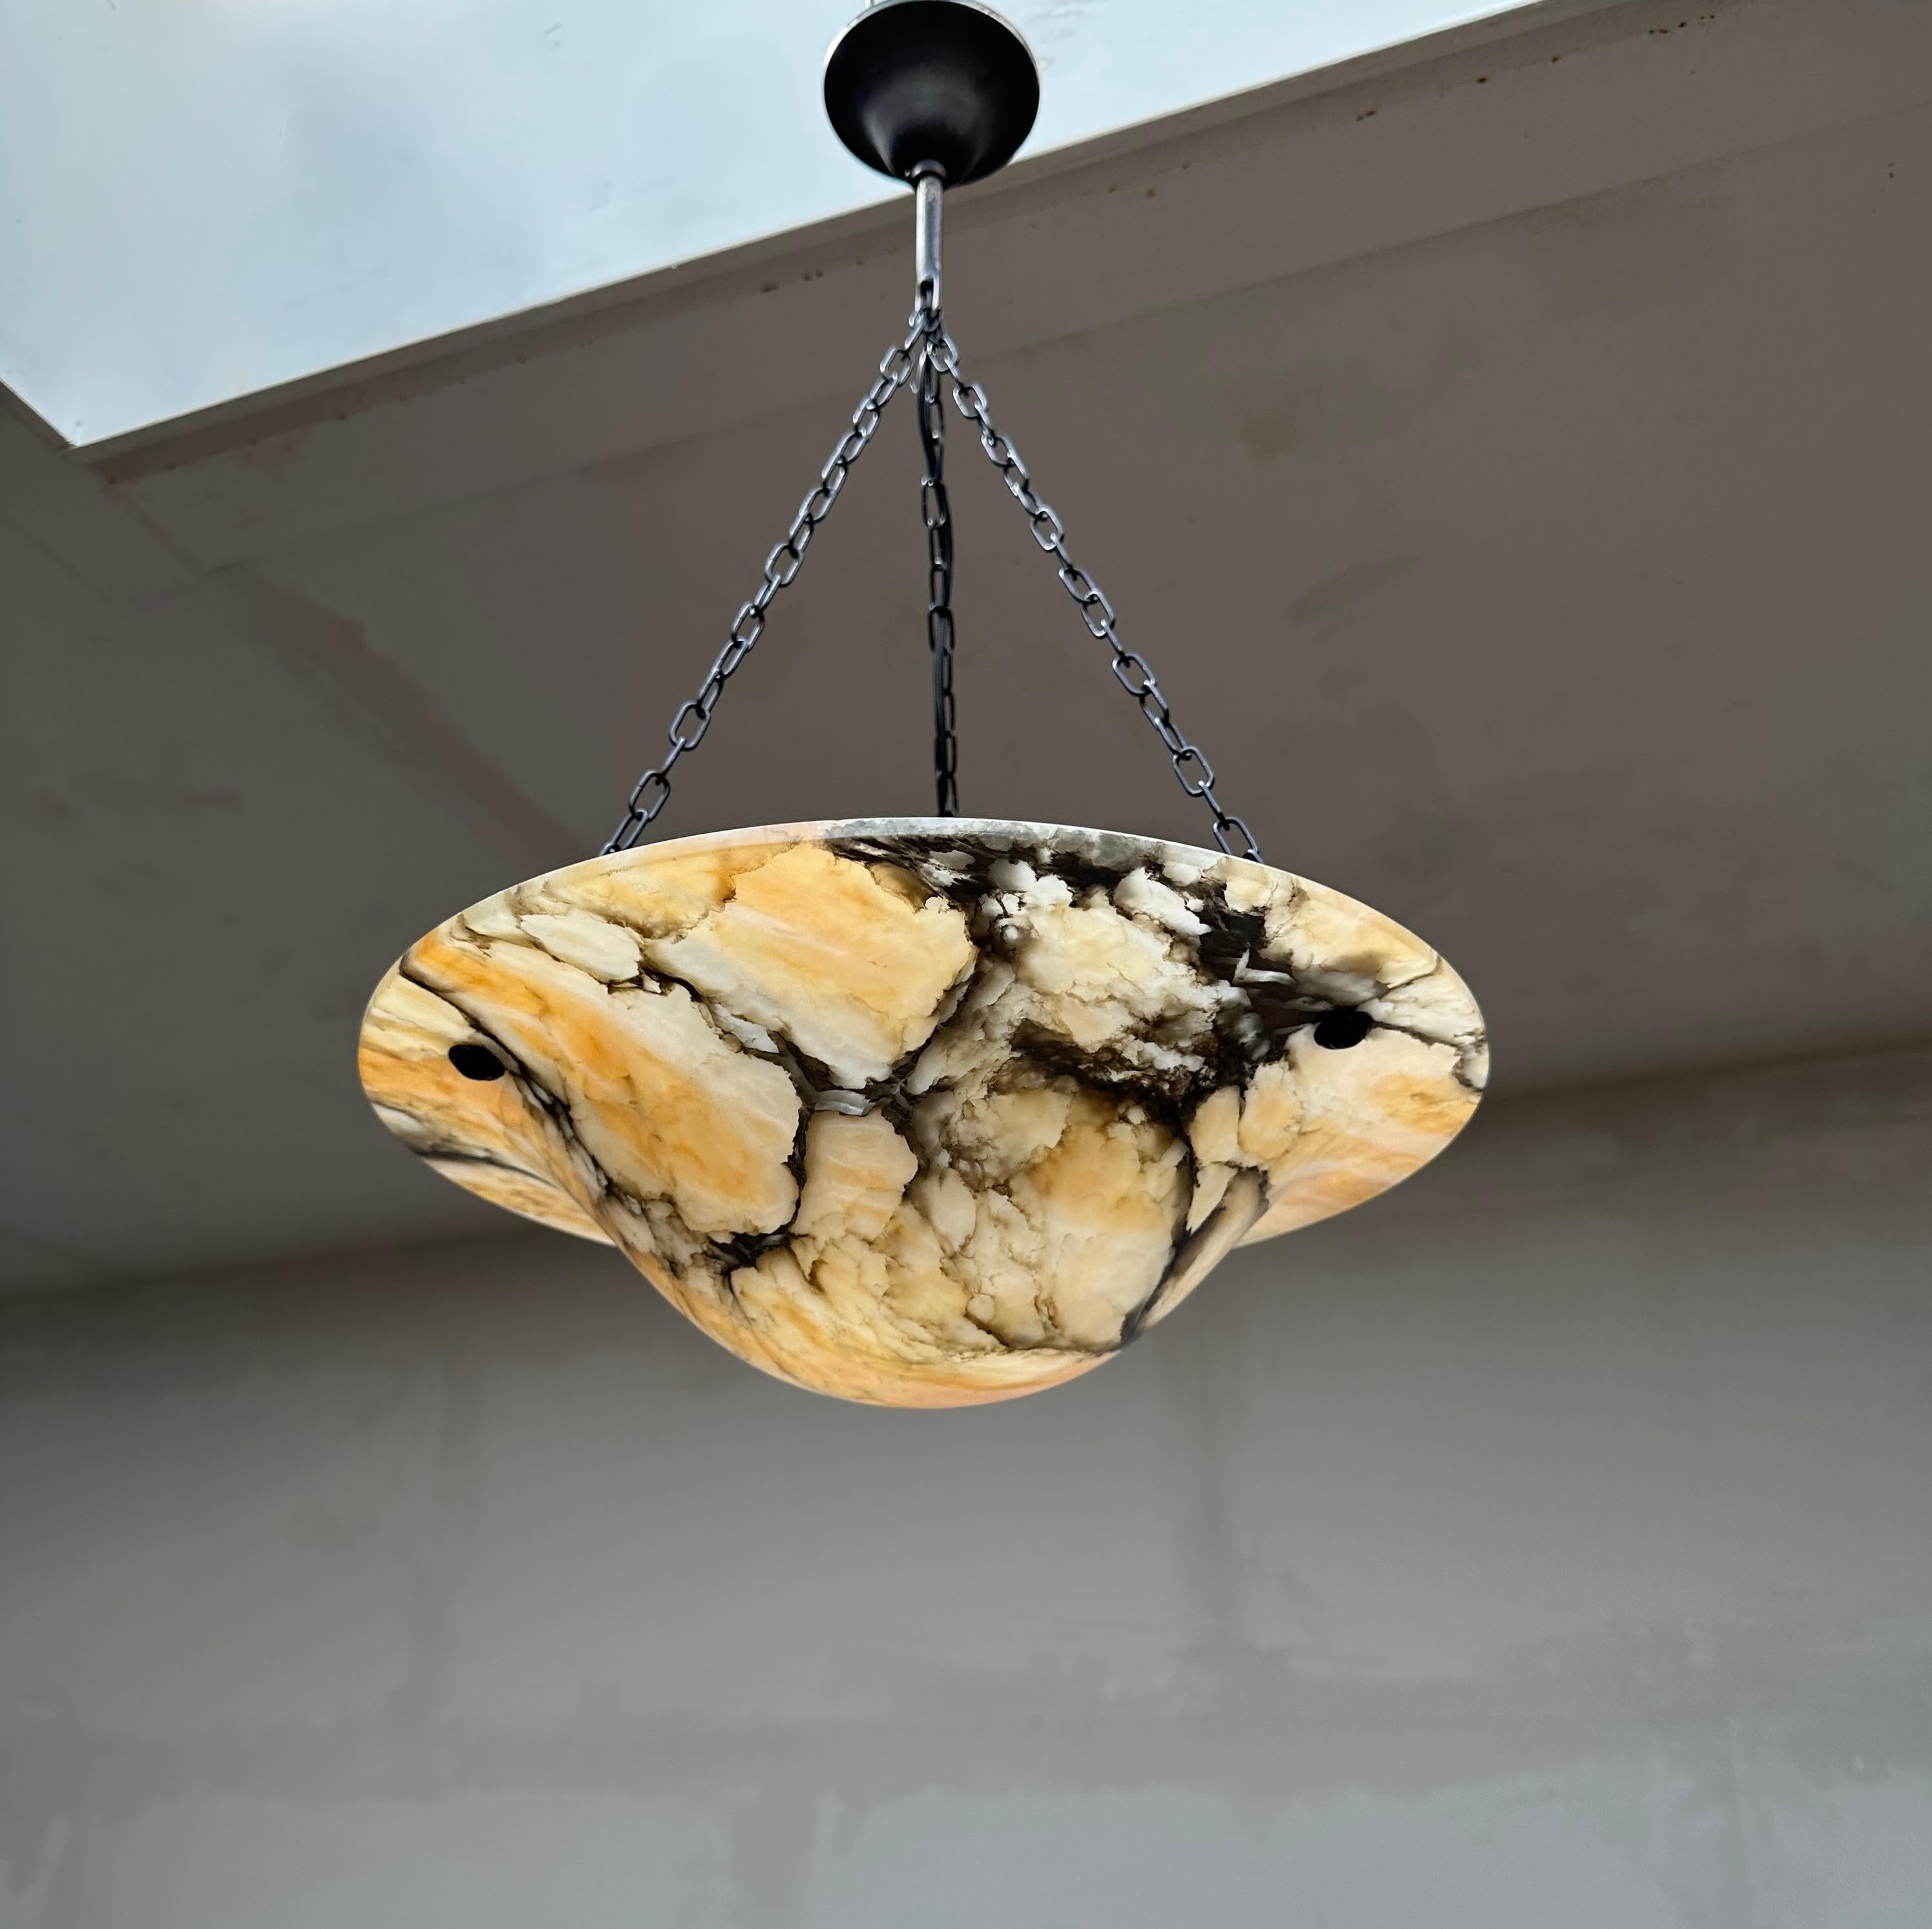 Beautiful shape and amazing colors and patterns, alabaster pendant.

If you are looking for a unique and great quality antique light fixture to grace your living space then this beautifully designed and all-handcrafted alabaster chandelier could be